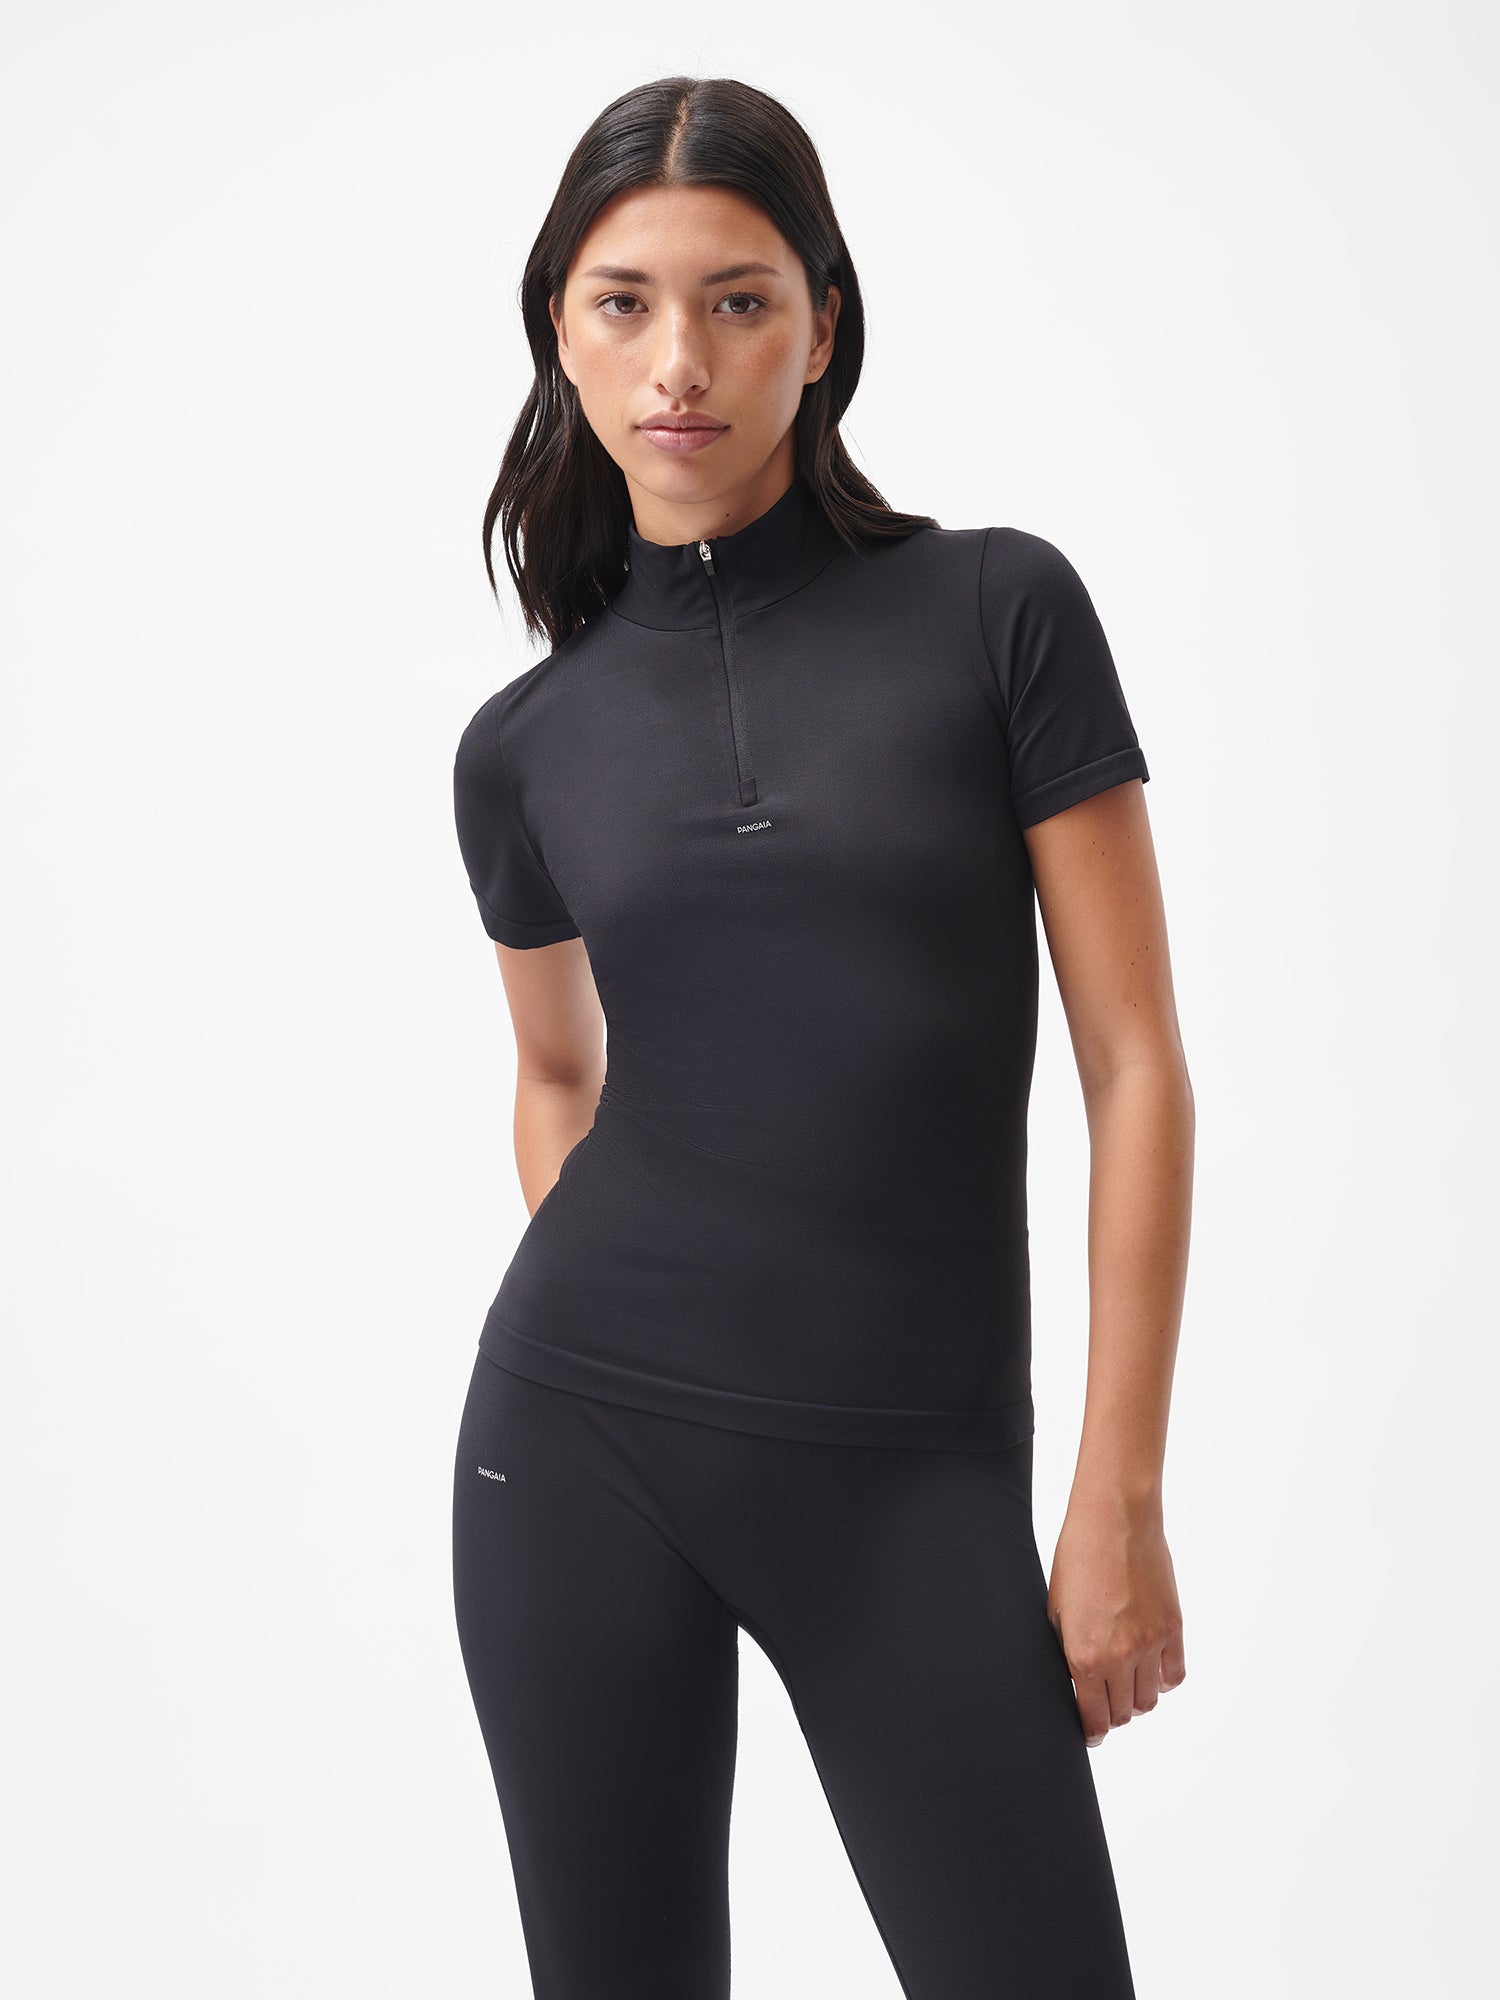 Womens-Active-Seamless-SS-Zip-Top-Black-female-1